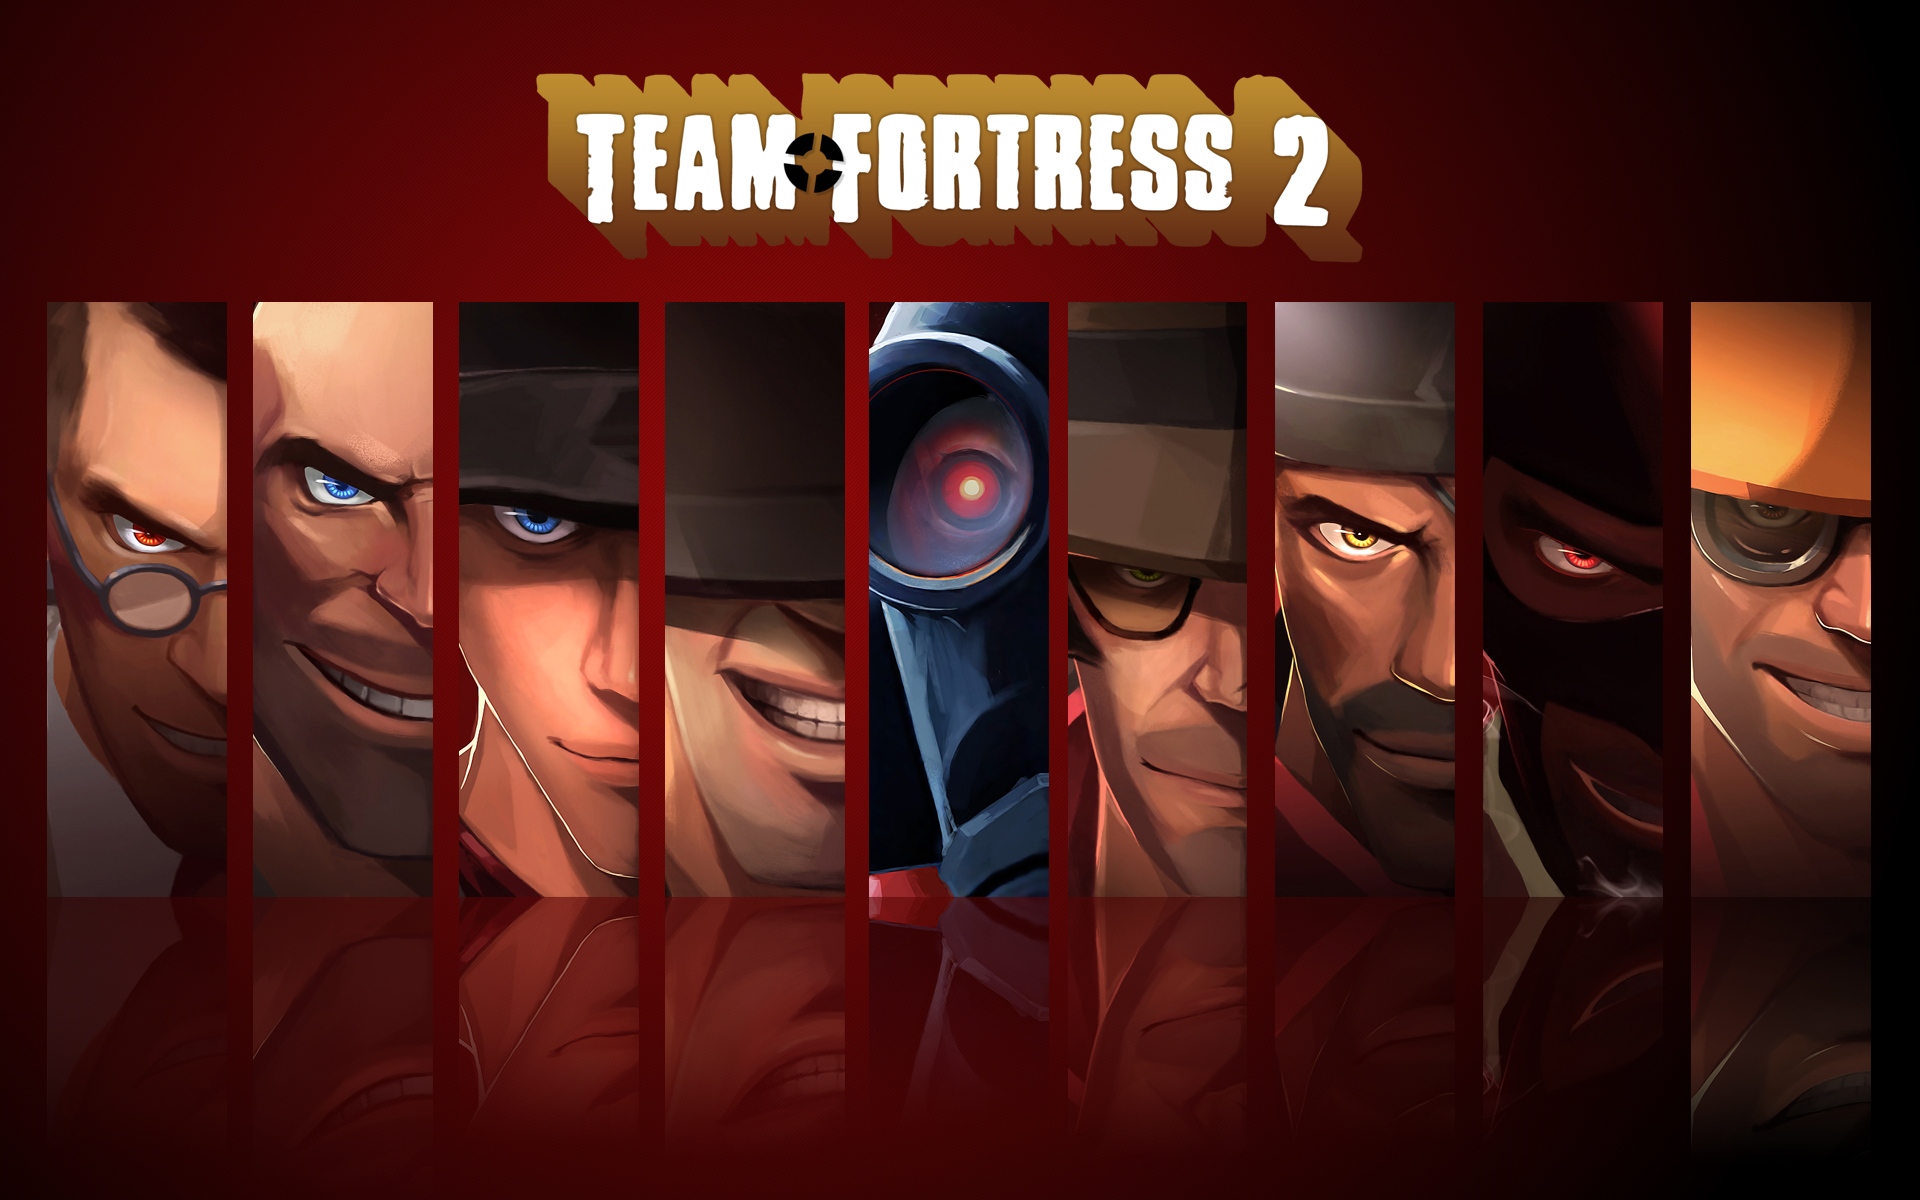 1440p team fortress 2 image